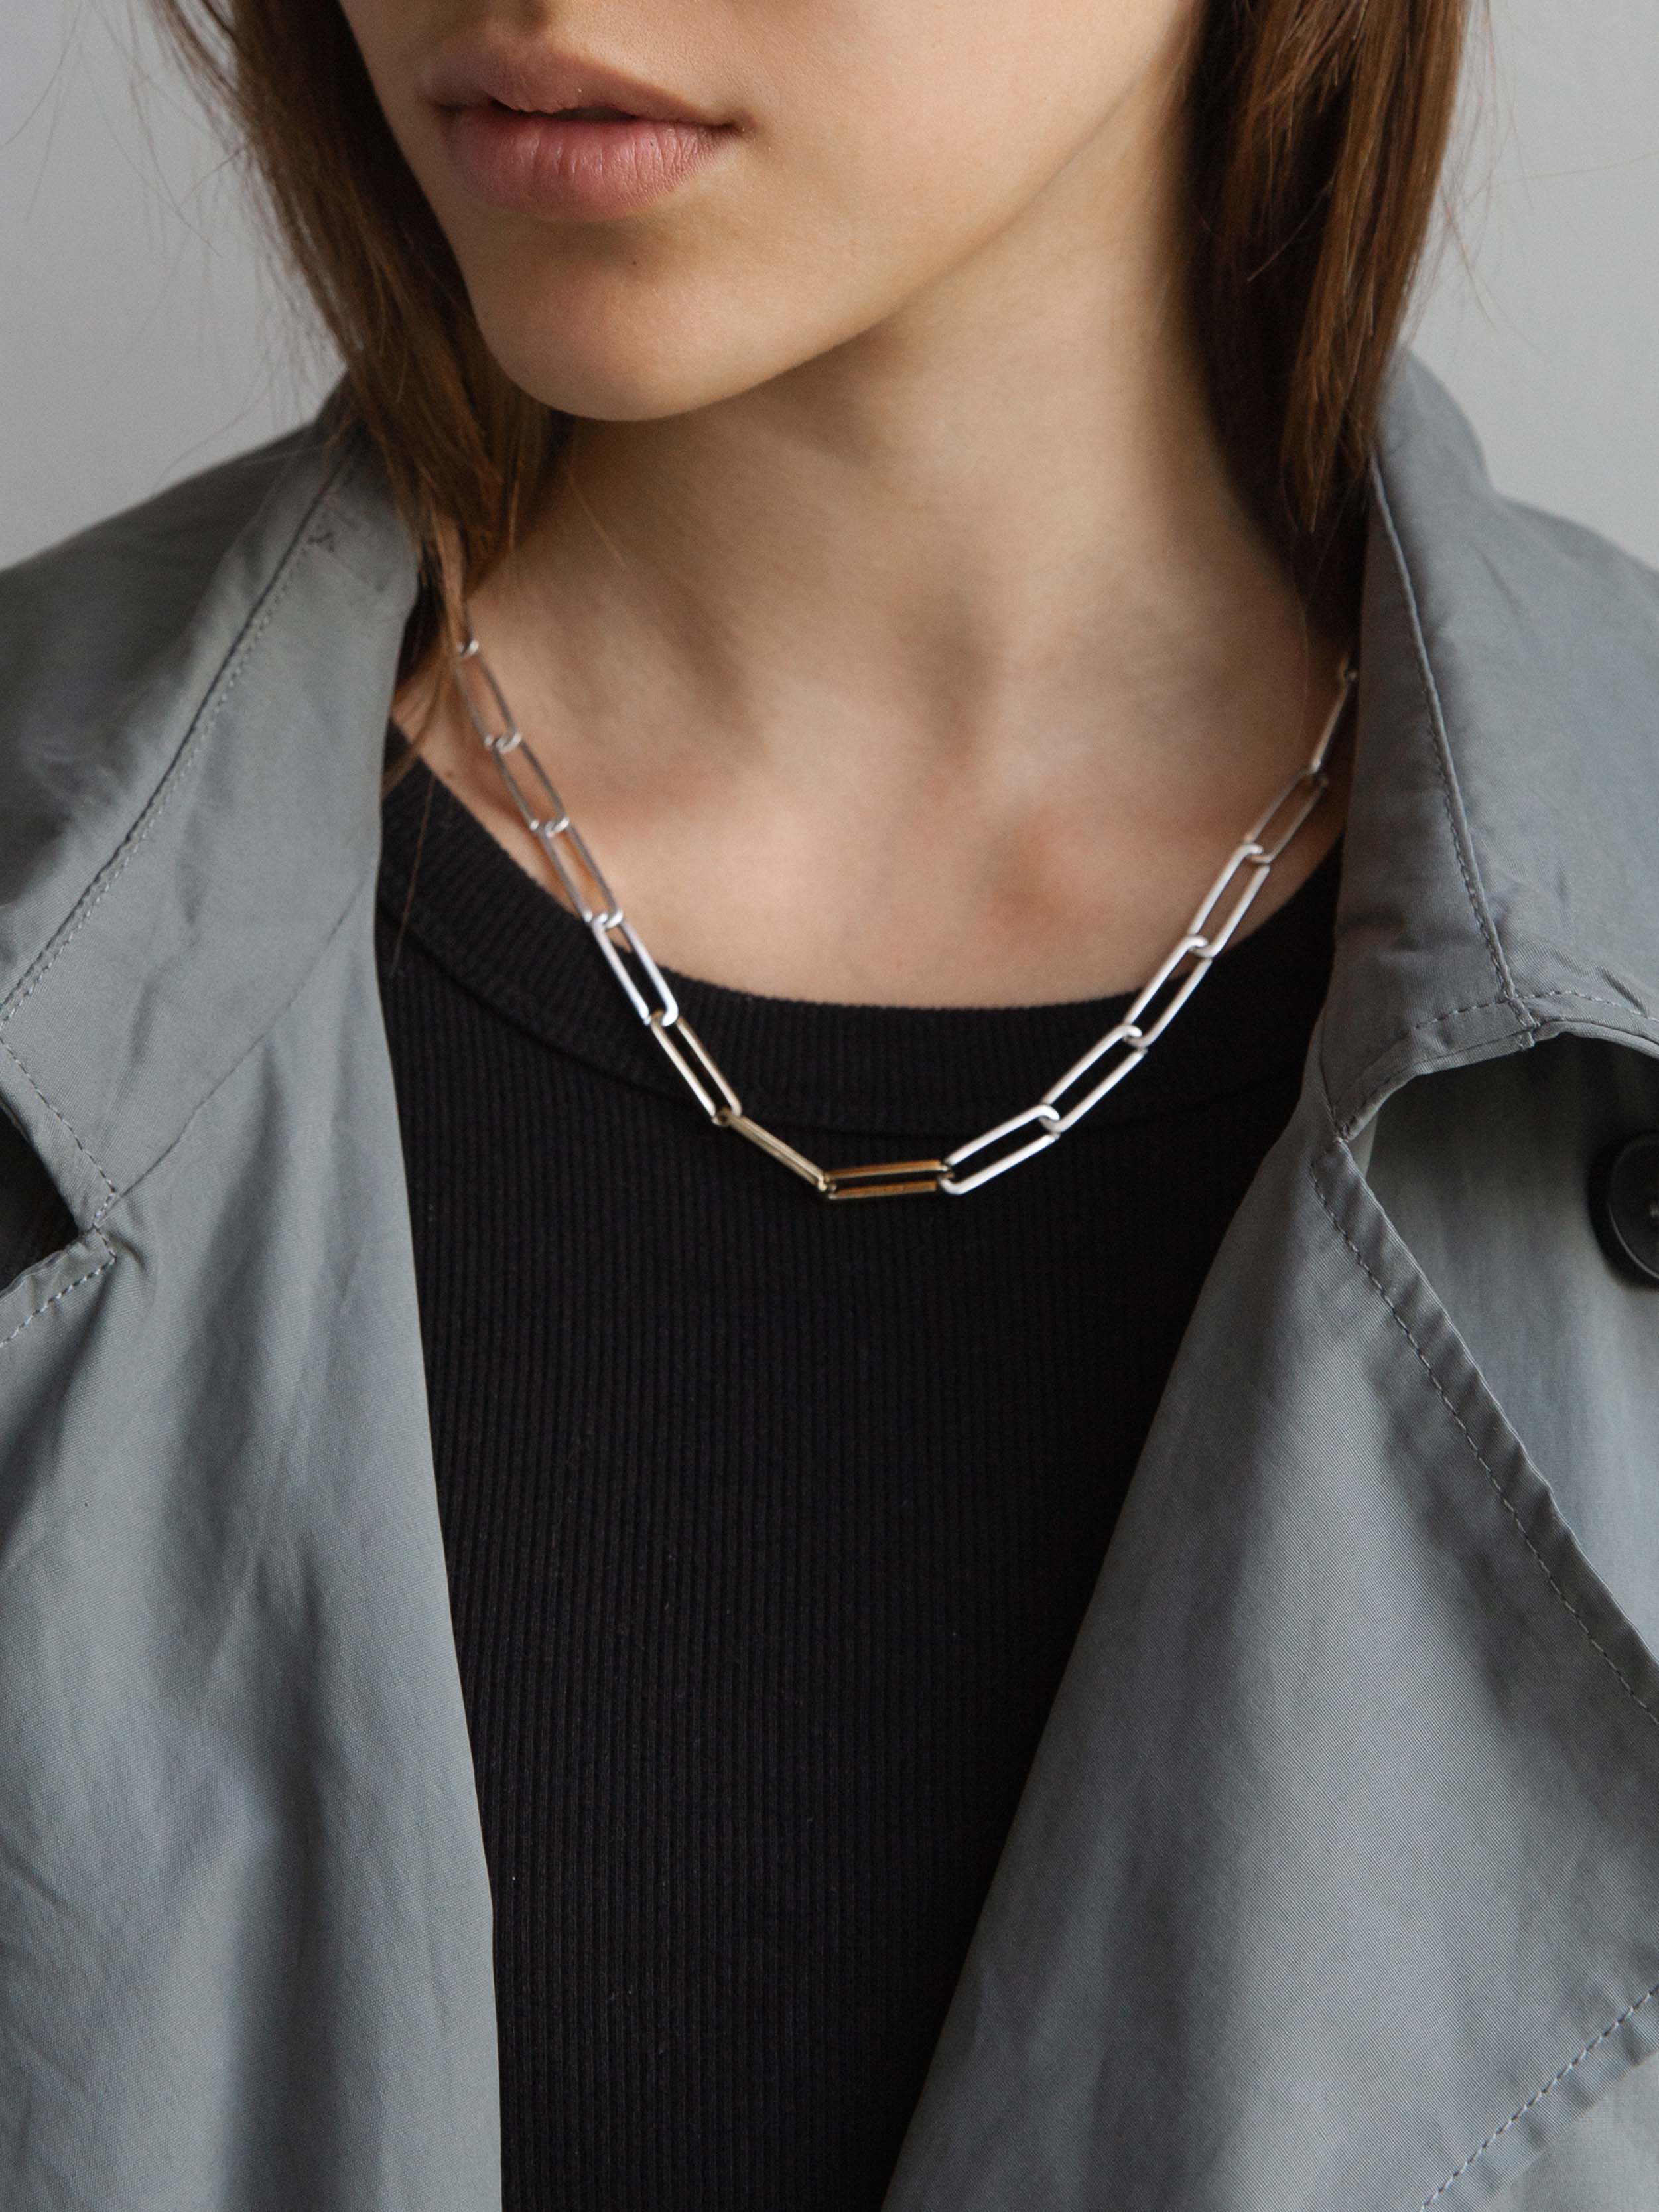 KINRADEN APS EXHALING HER SMALL Necklace - sterling silver, 3 gold links Necklaces